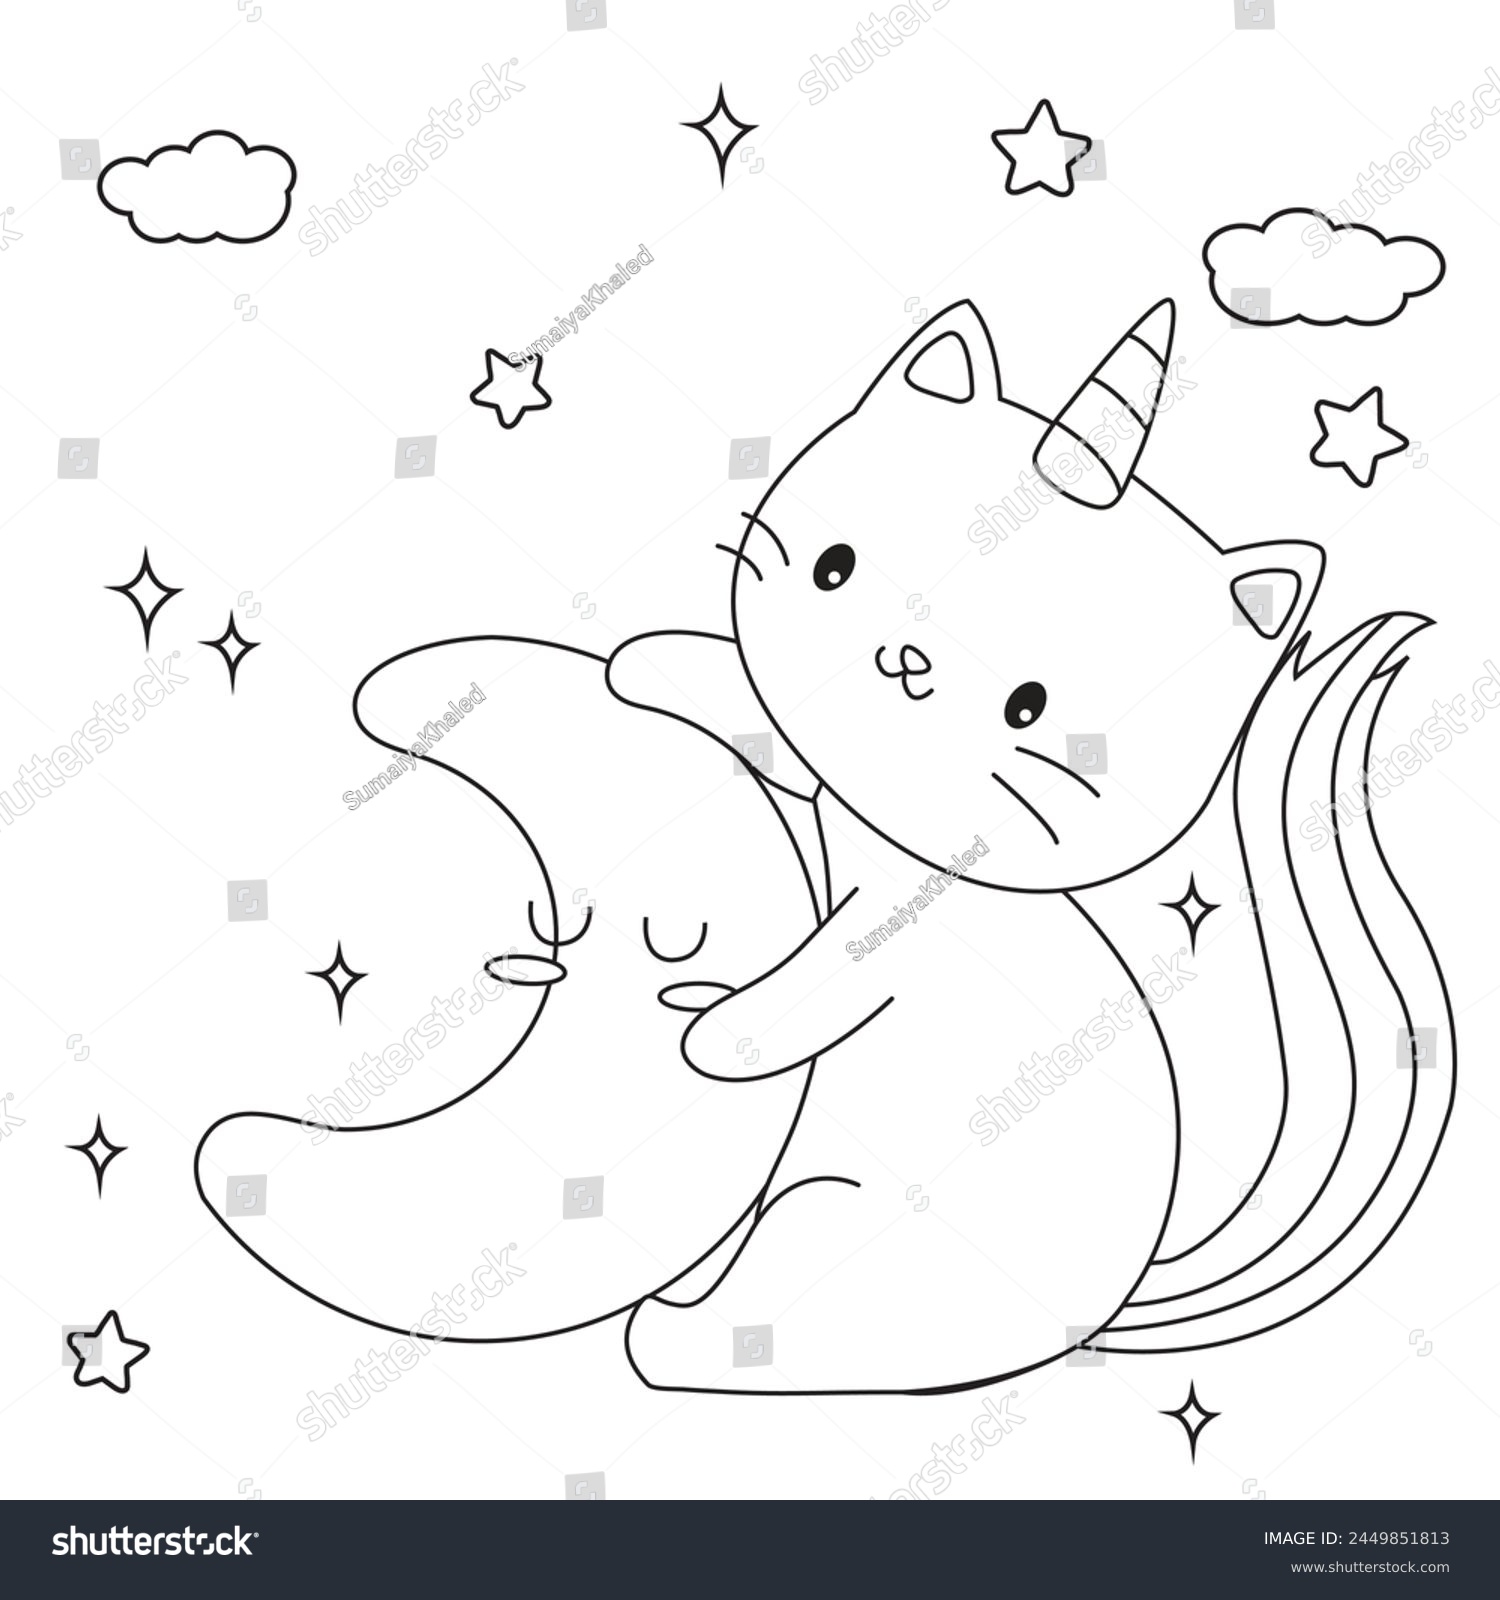 SVG of HD printable caticorn and cat unicorn or anime cat coloring pages for children kids and adults. Children coloring pages, caticorn coloring pages, learning for kids. Cat Vector svg